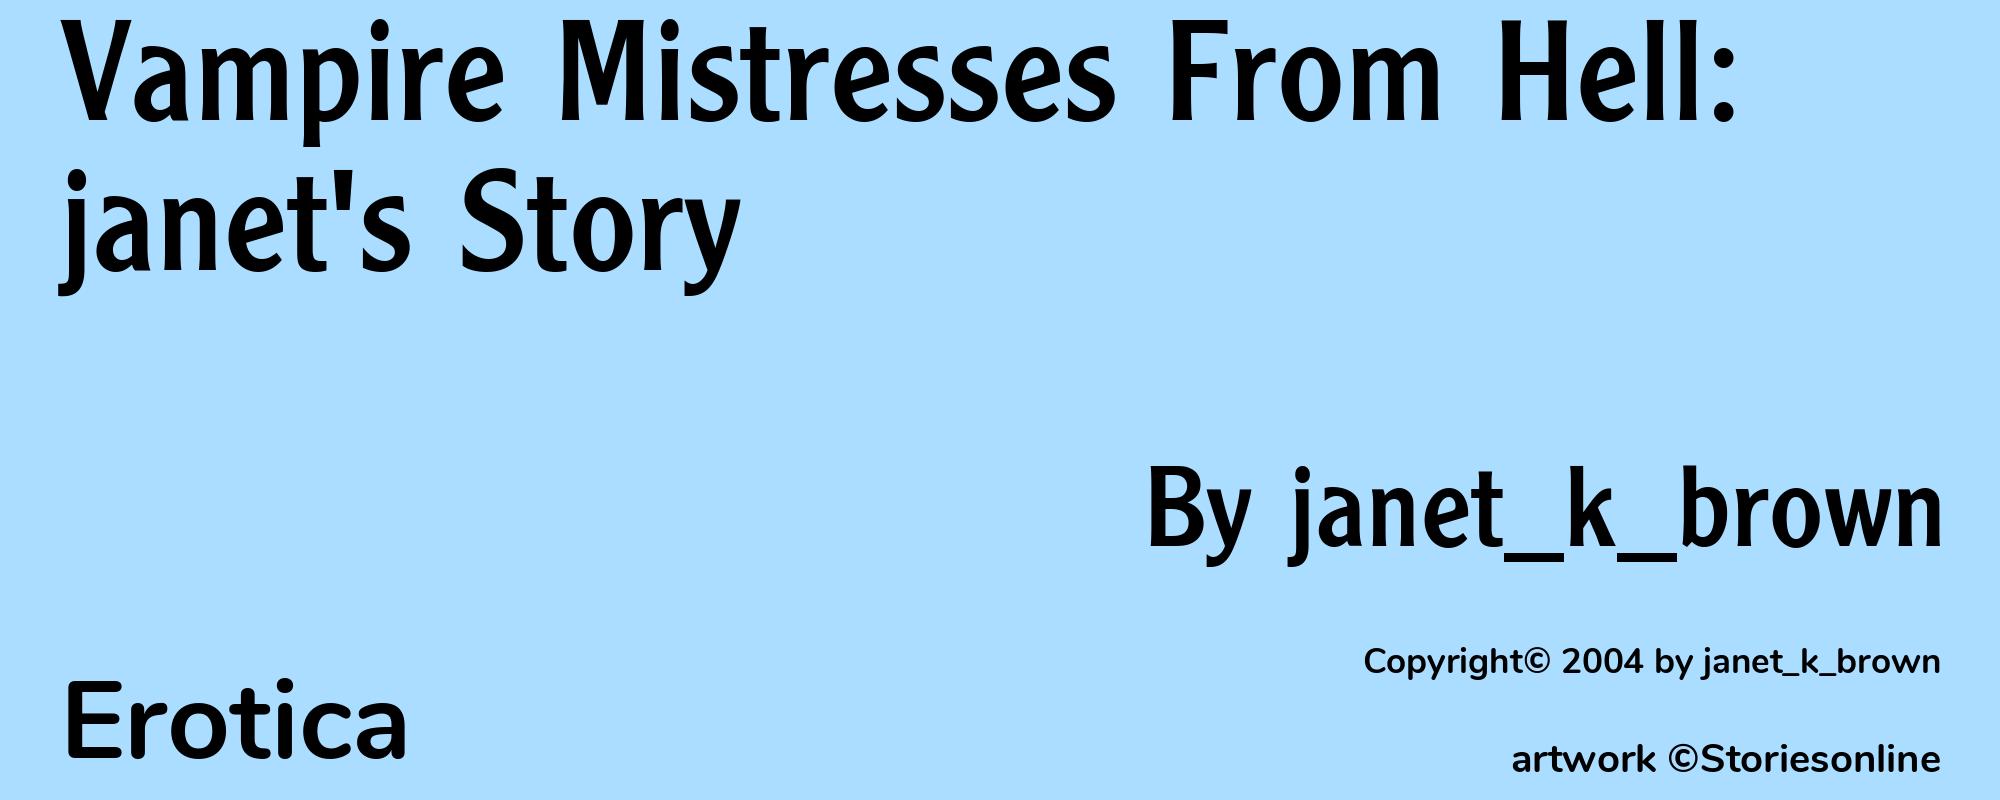 Vampire Mistresses From Hell: janet's Story - Cover